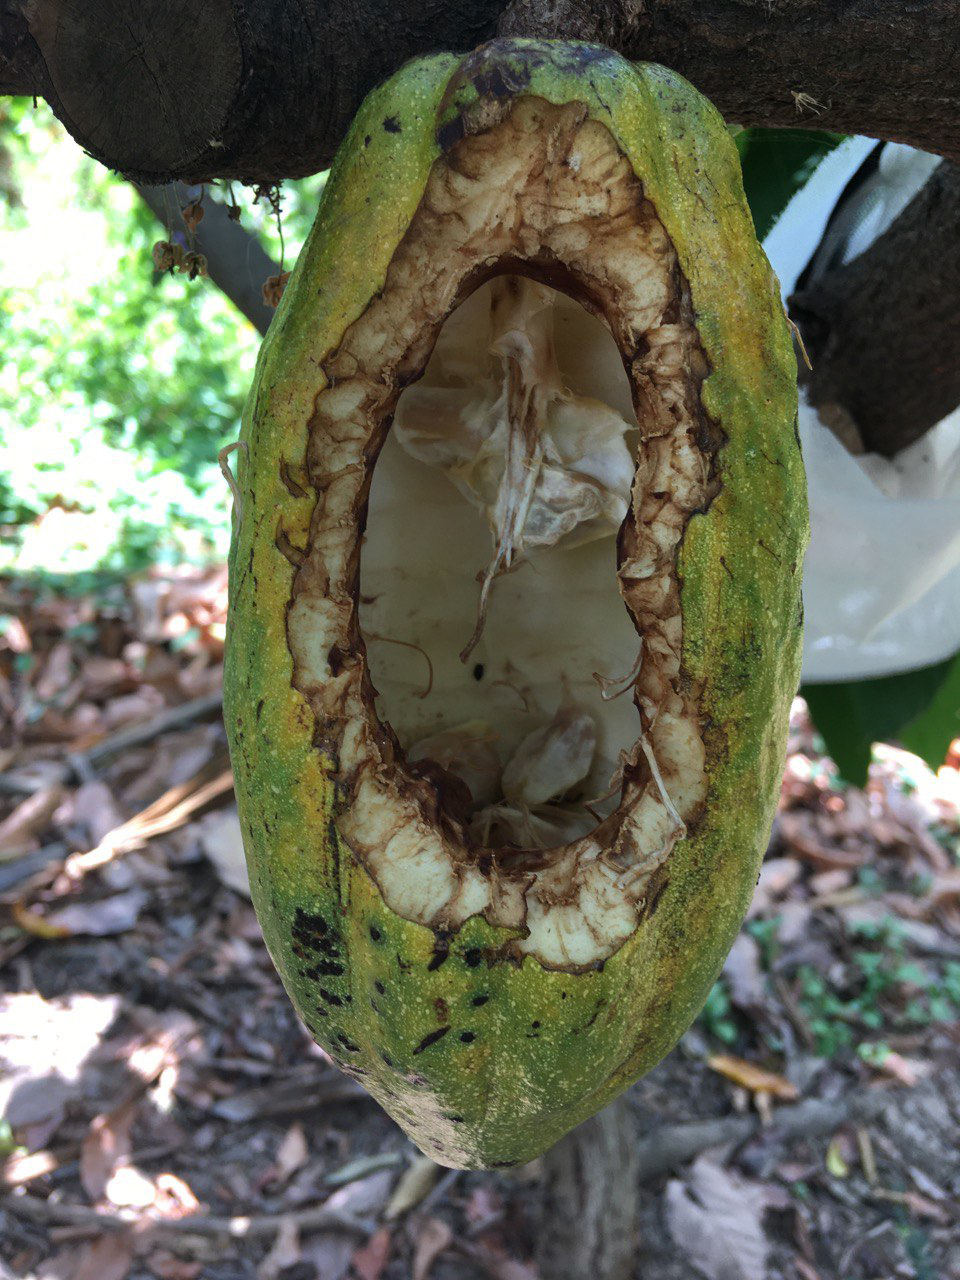 Squirrels prefer to eat cacao seeds when the fruits are almost ripe. Here you can see a cacao fruit whose shell has been nibbled by a squirrel. The seeds were completely removed by the animal.